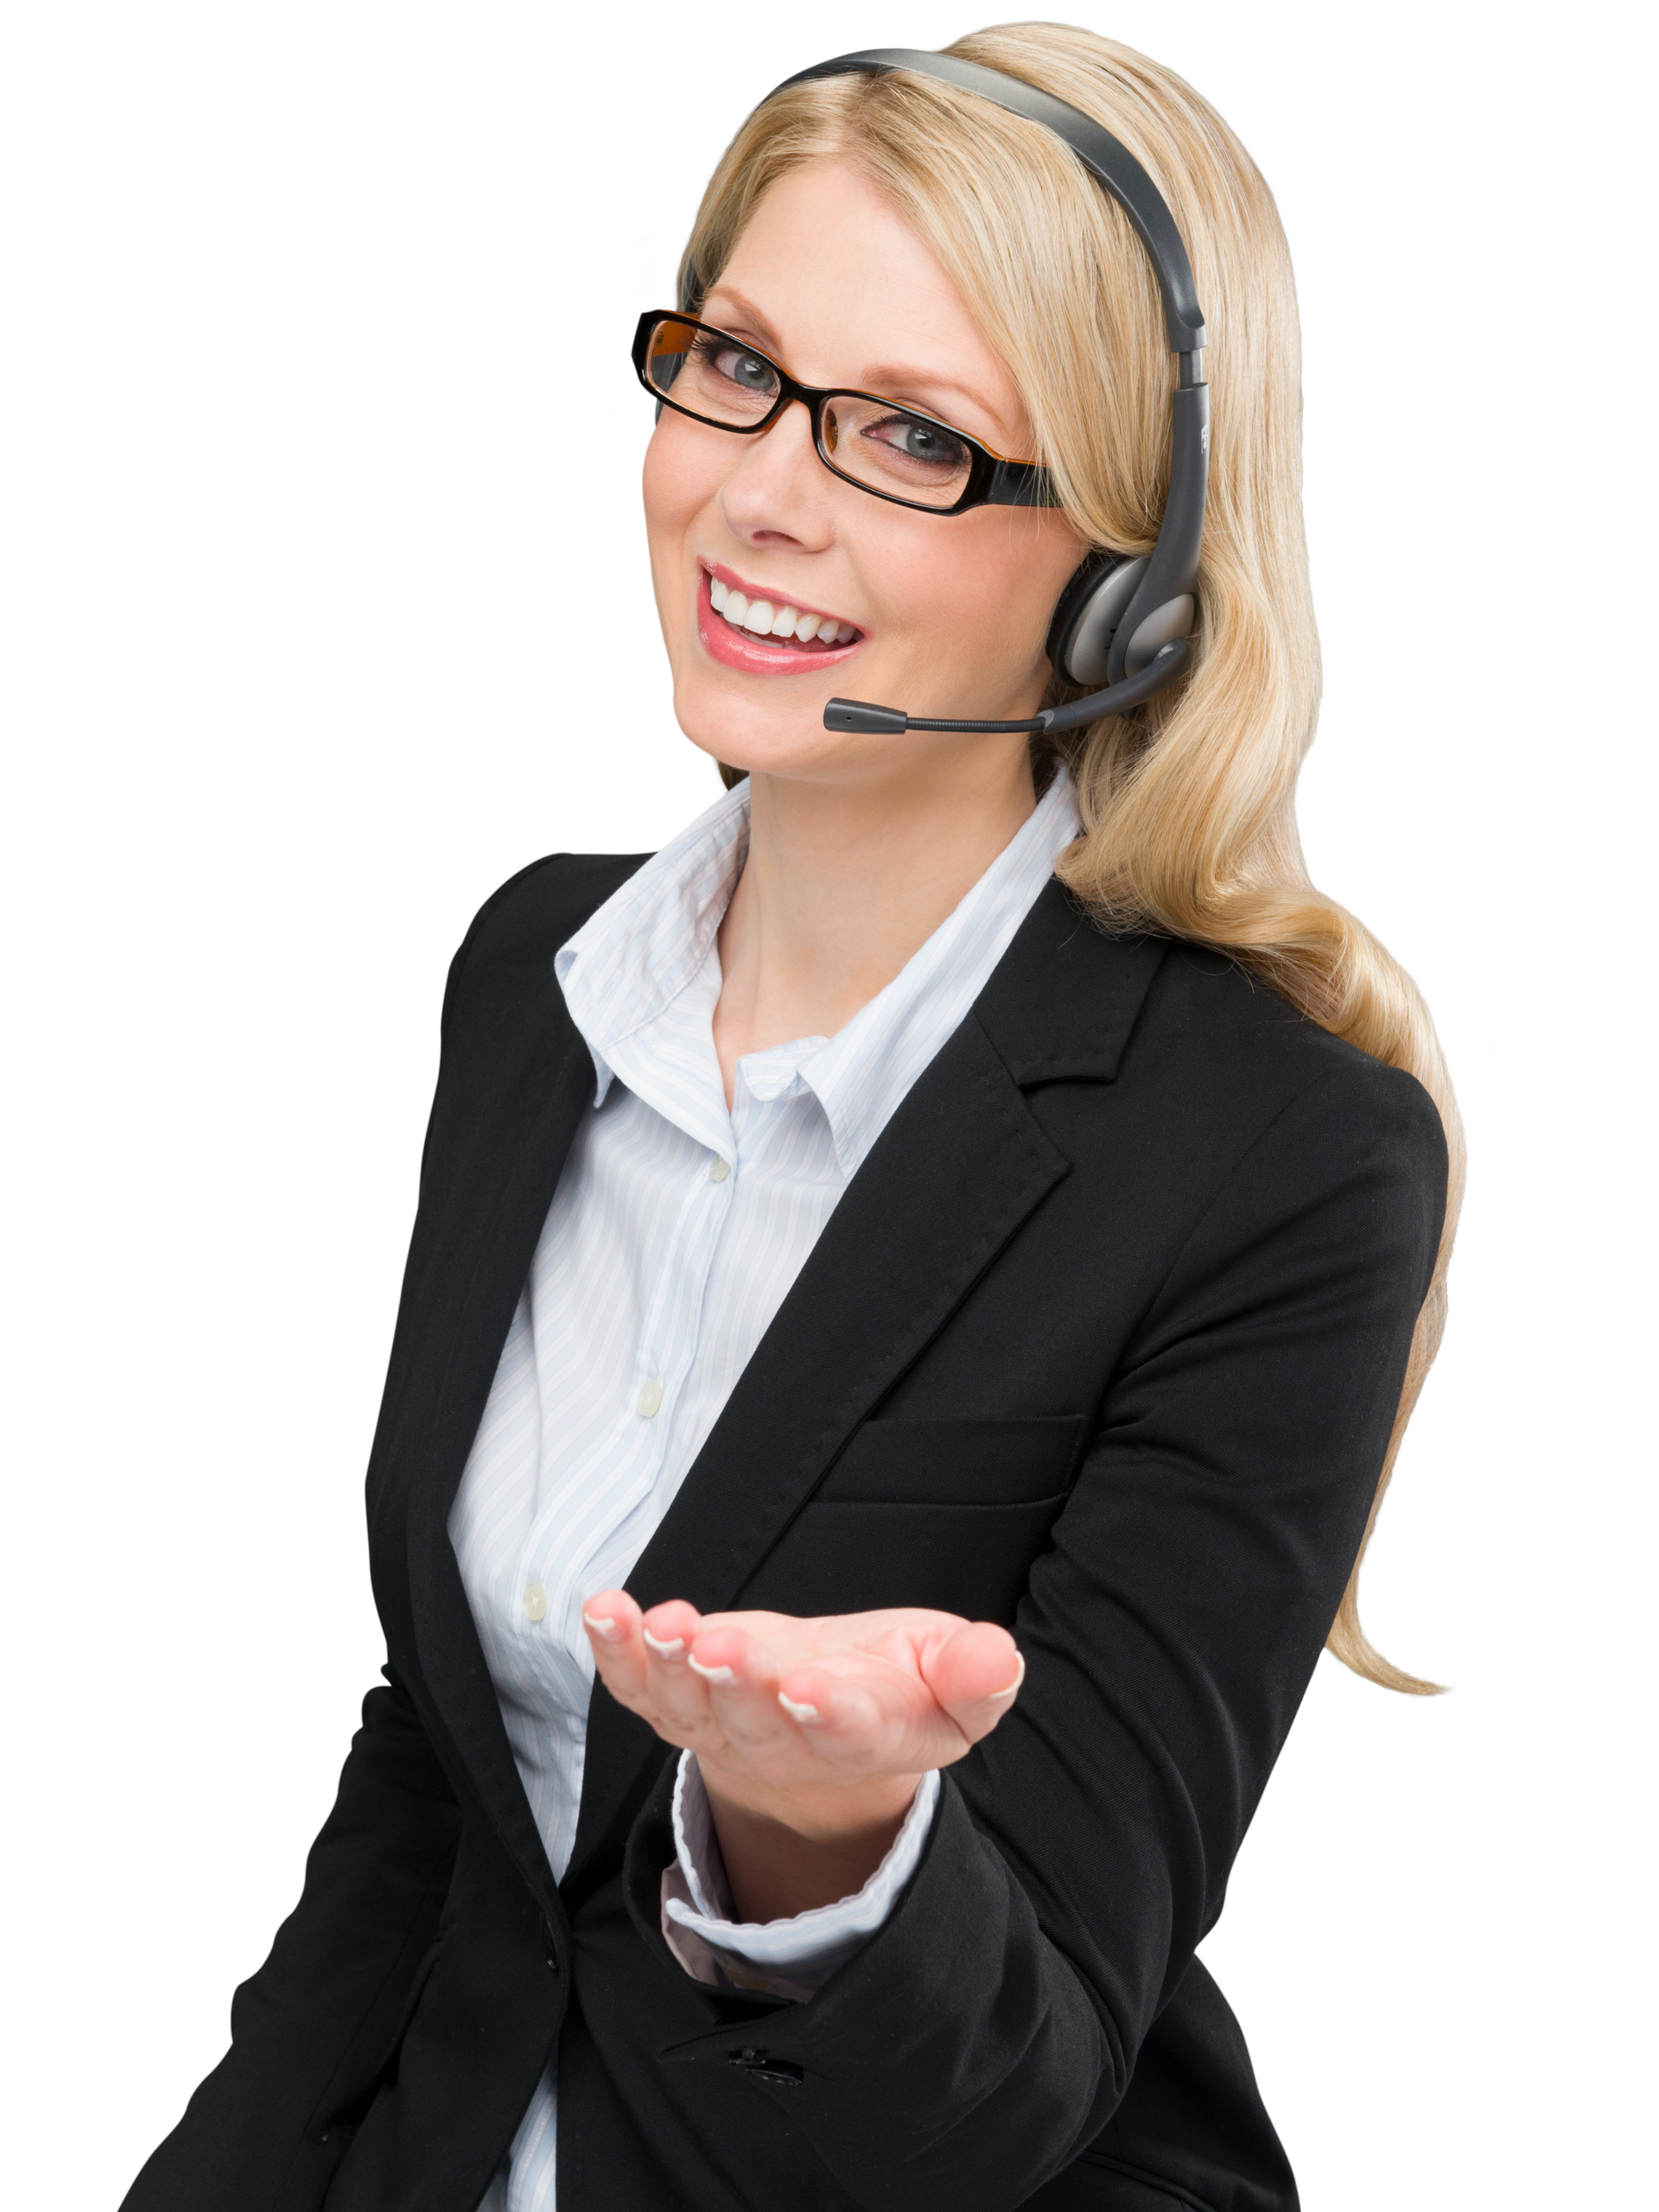 A virtual assistant wearing a headset is smiling and holding out her hand